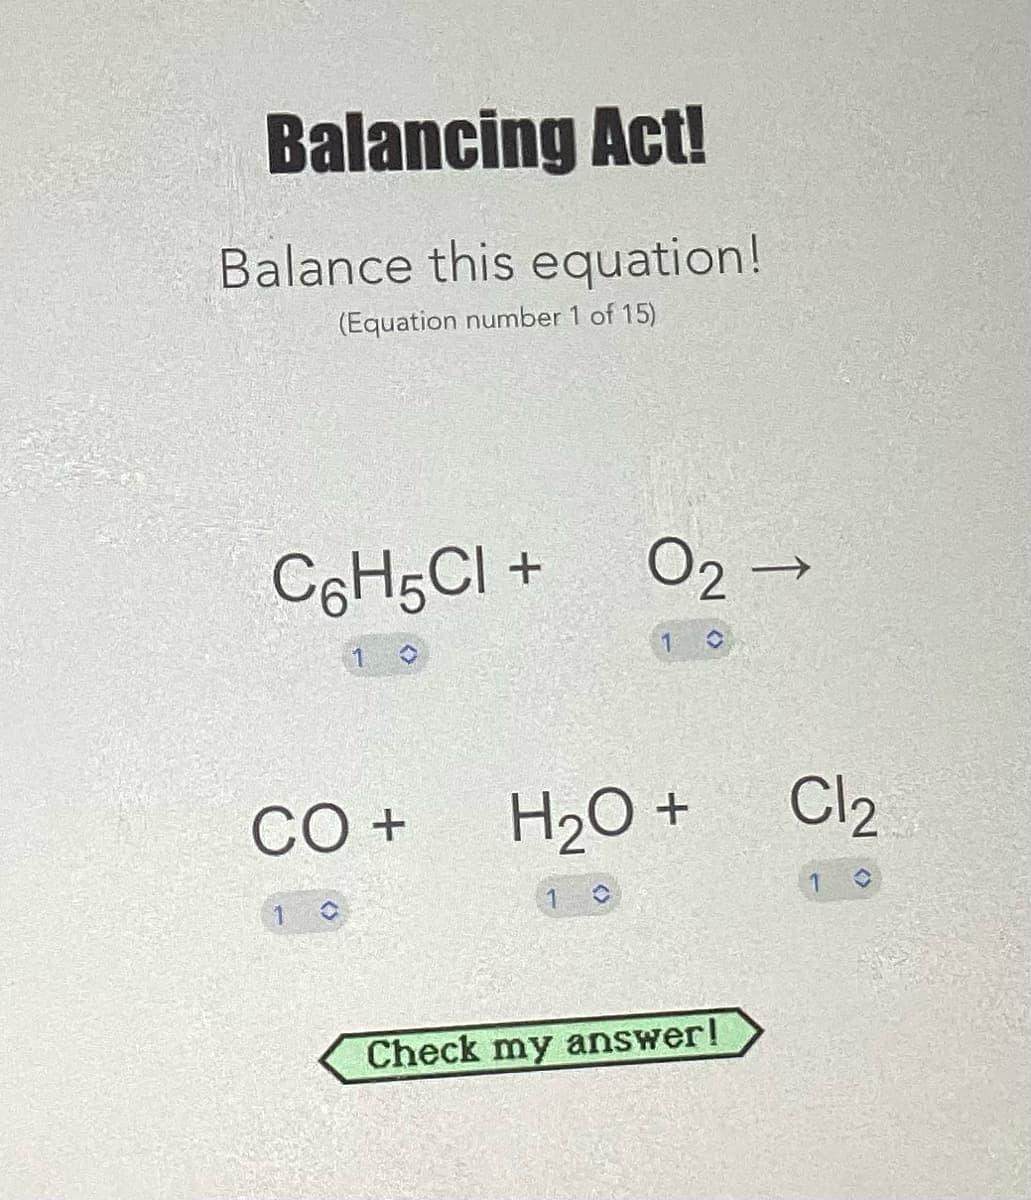 Balancing Act!
Balance this equation!
(Equation number 1 of 15)
C6H5Cl +
1
O
CO +
02 →
H₂O +
1 ✪
Check my answer!
Cl₂
1